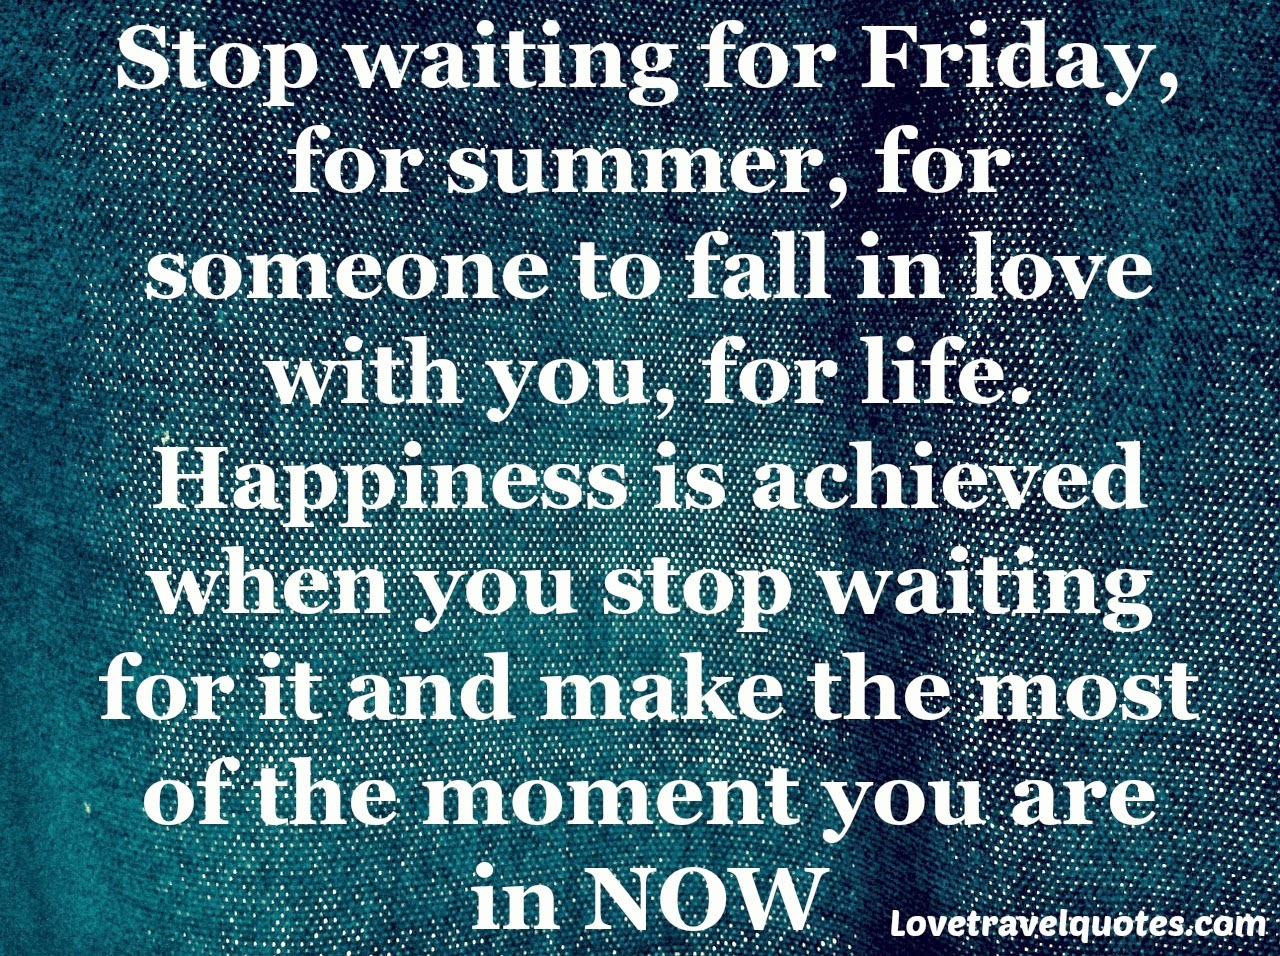 Stop waiting for Friday for summer for someone to fall in love with you for life Happiness is achieved when you stop waiting for it and make the most of